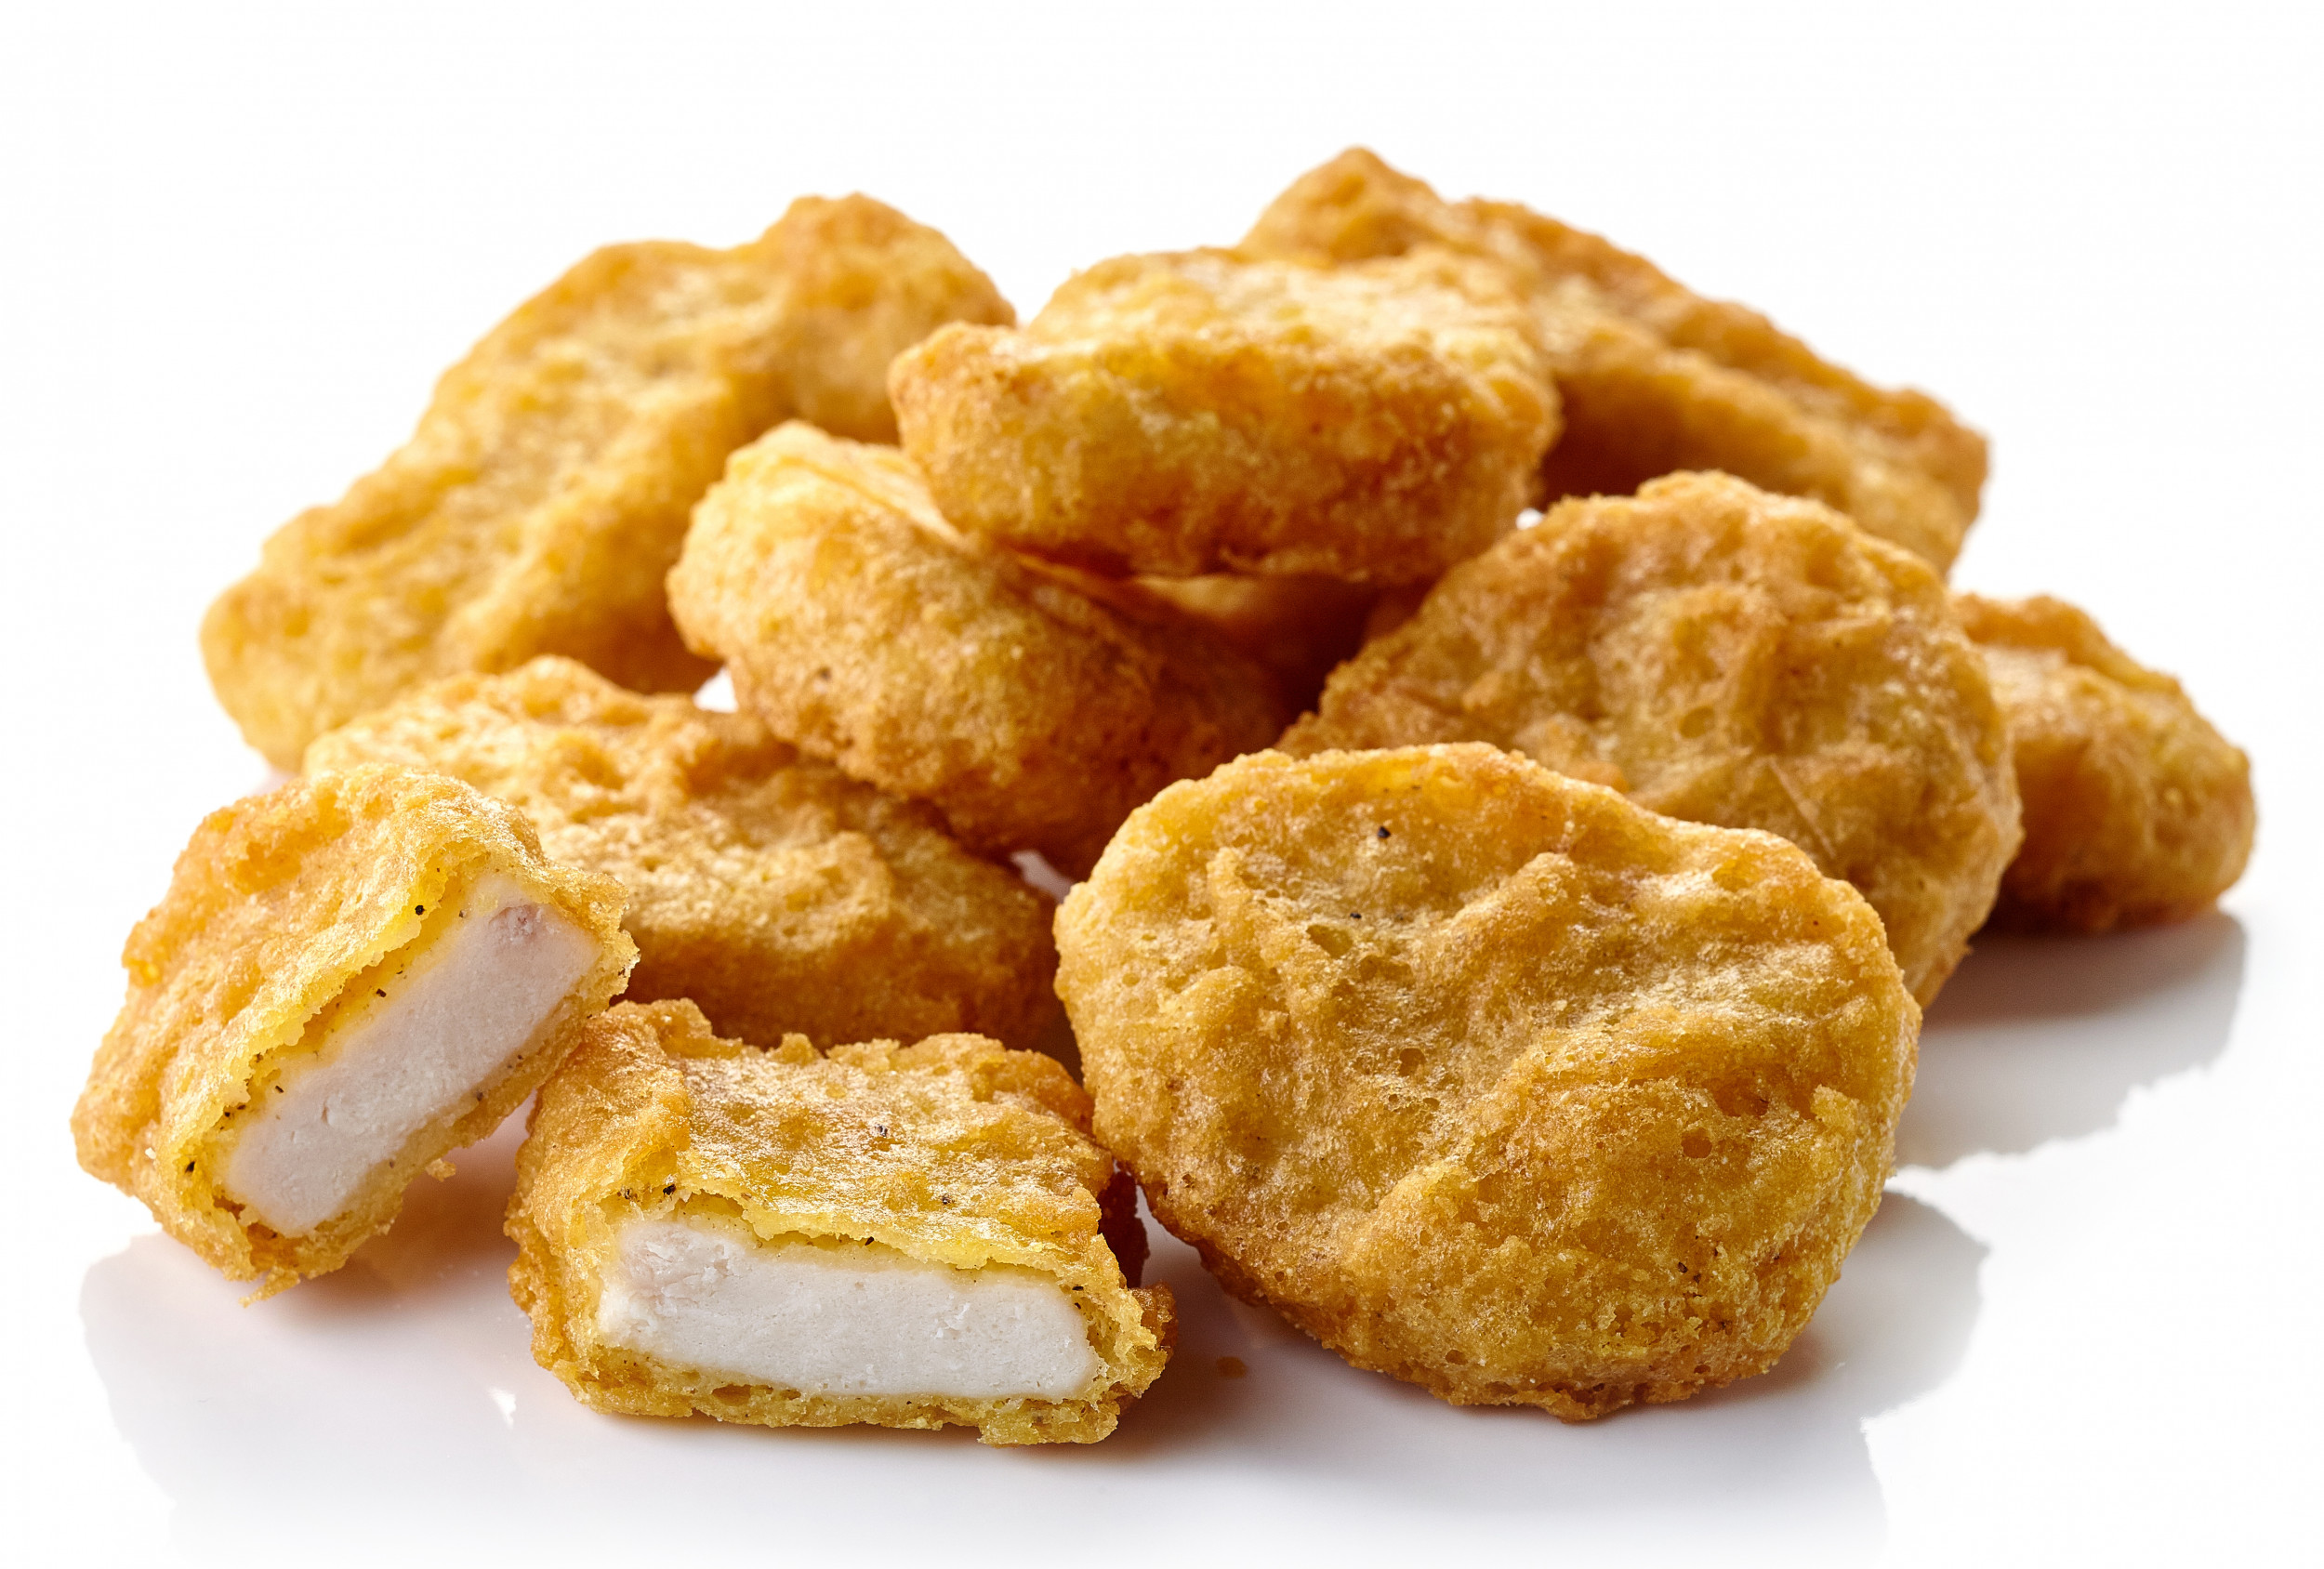 Chef Swears by This Bizarre McDonald's Hack for Eating Chicken Nuggets